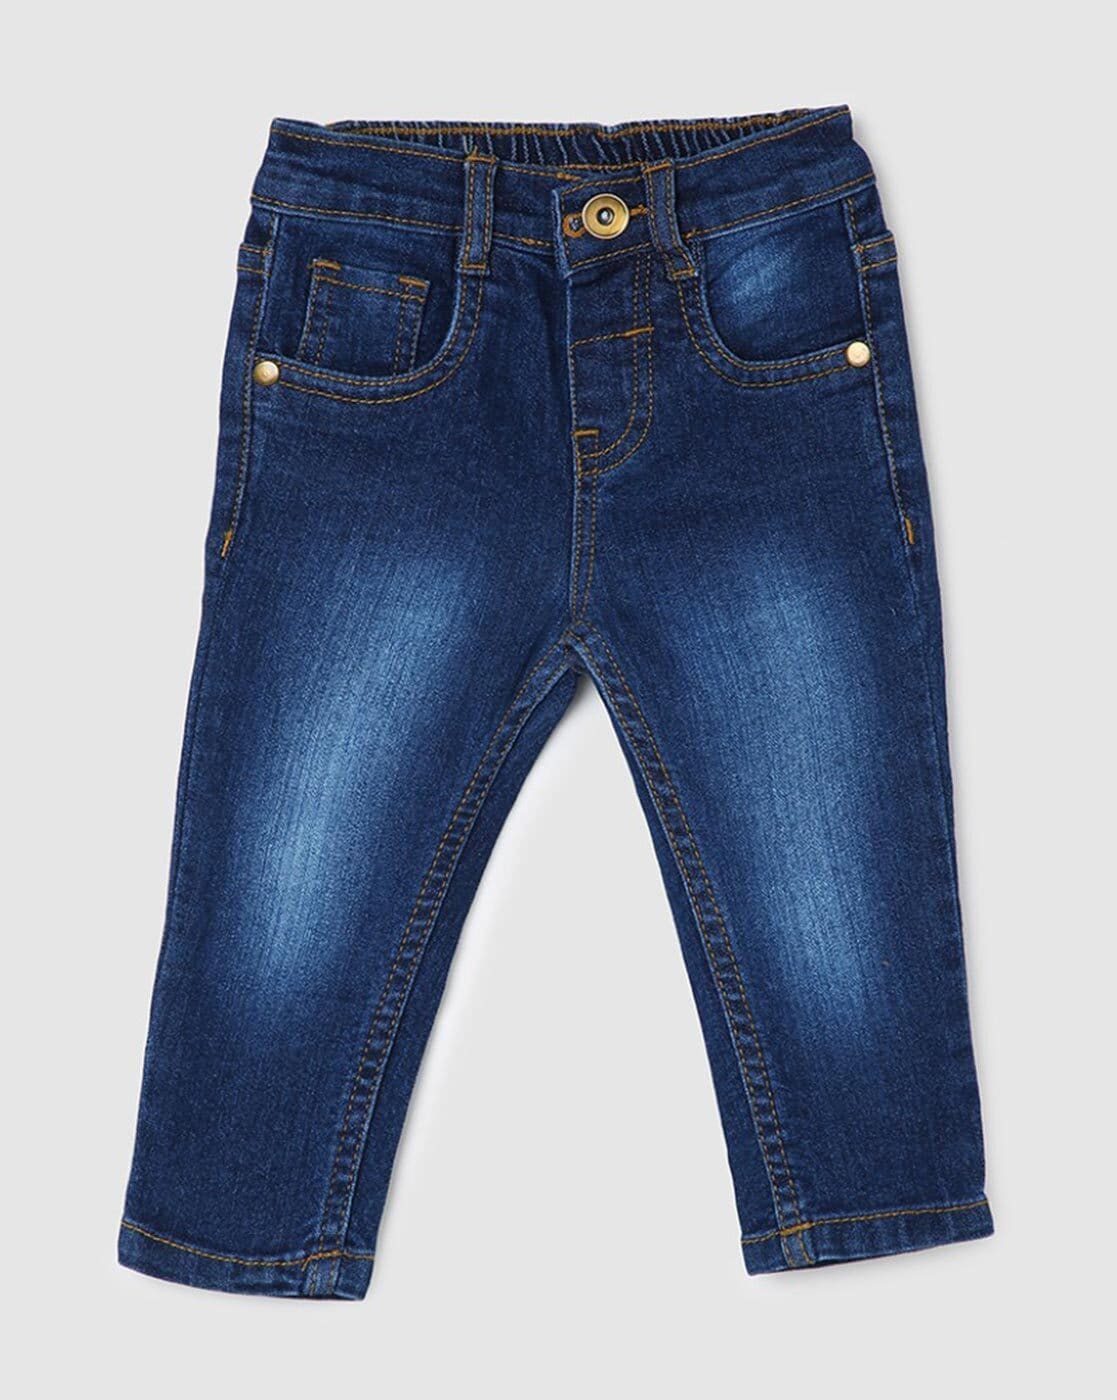 Jeans For Boys (Size 22/30) - 3 Colors Available in Delhi at best price by  Hunky Dudes - Justdial